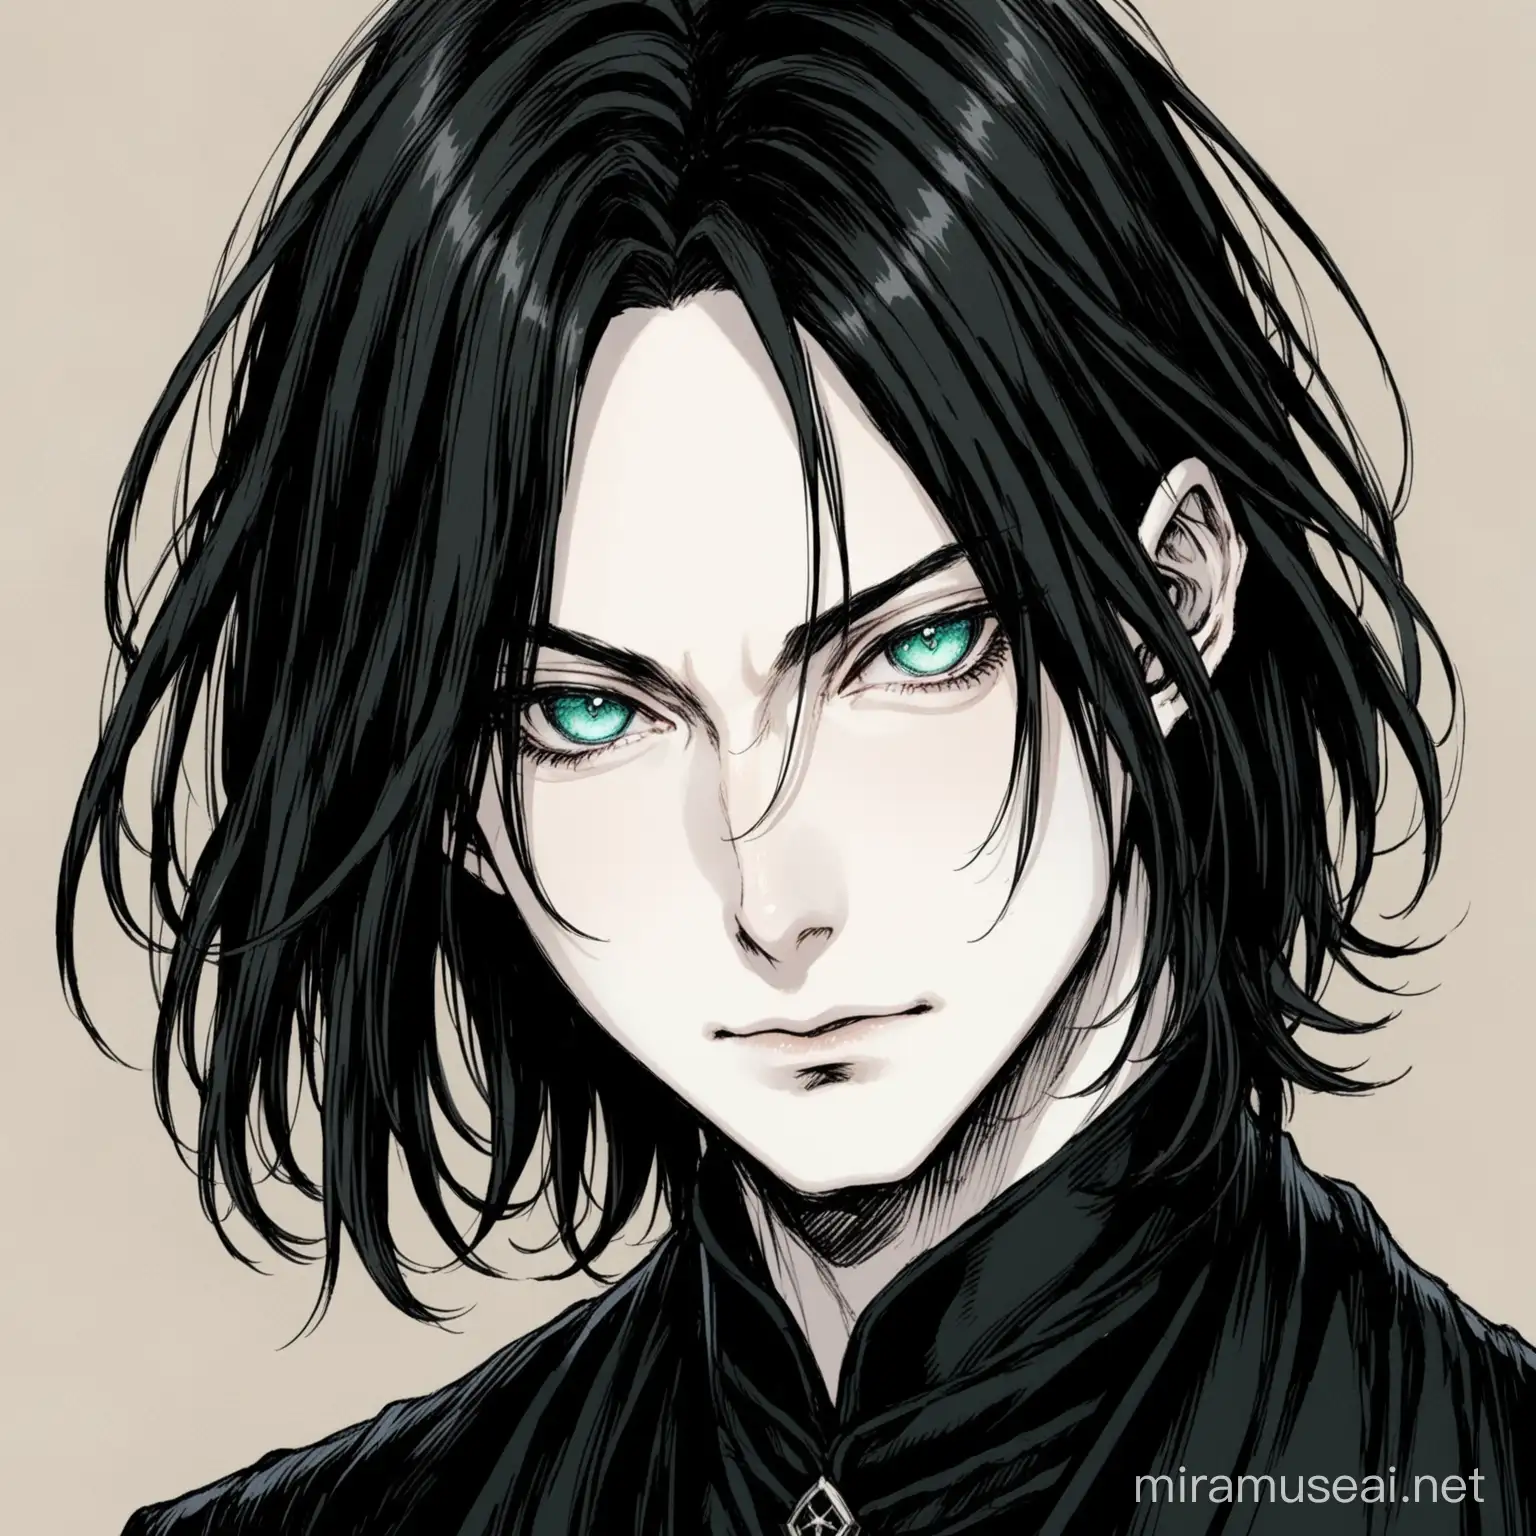 Elegant Young Severus Snape Portrait with Onyx Eyes and Flowing Black Hair